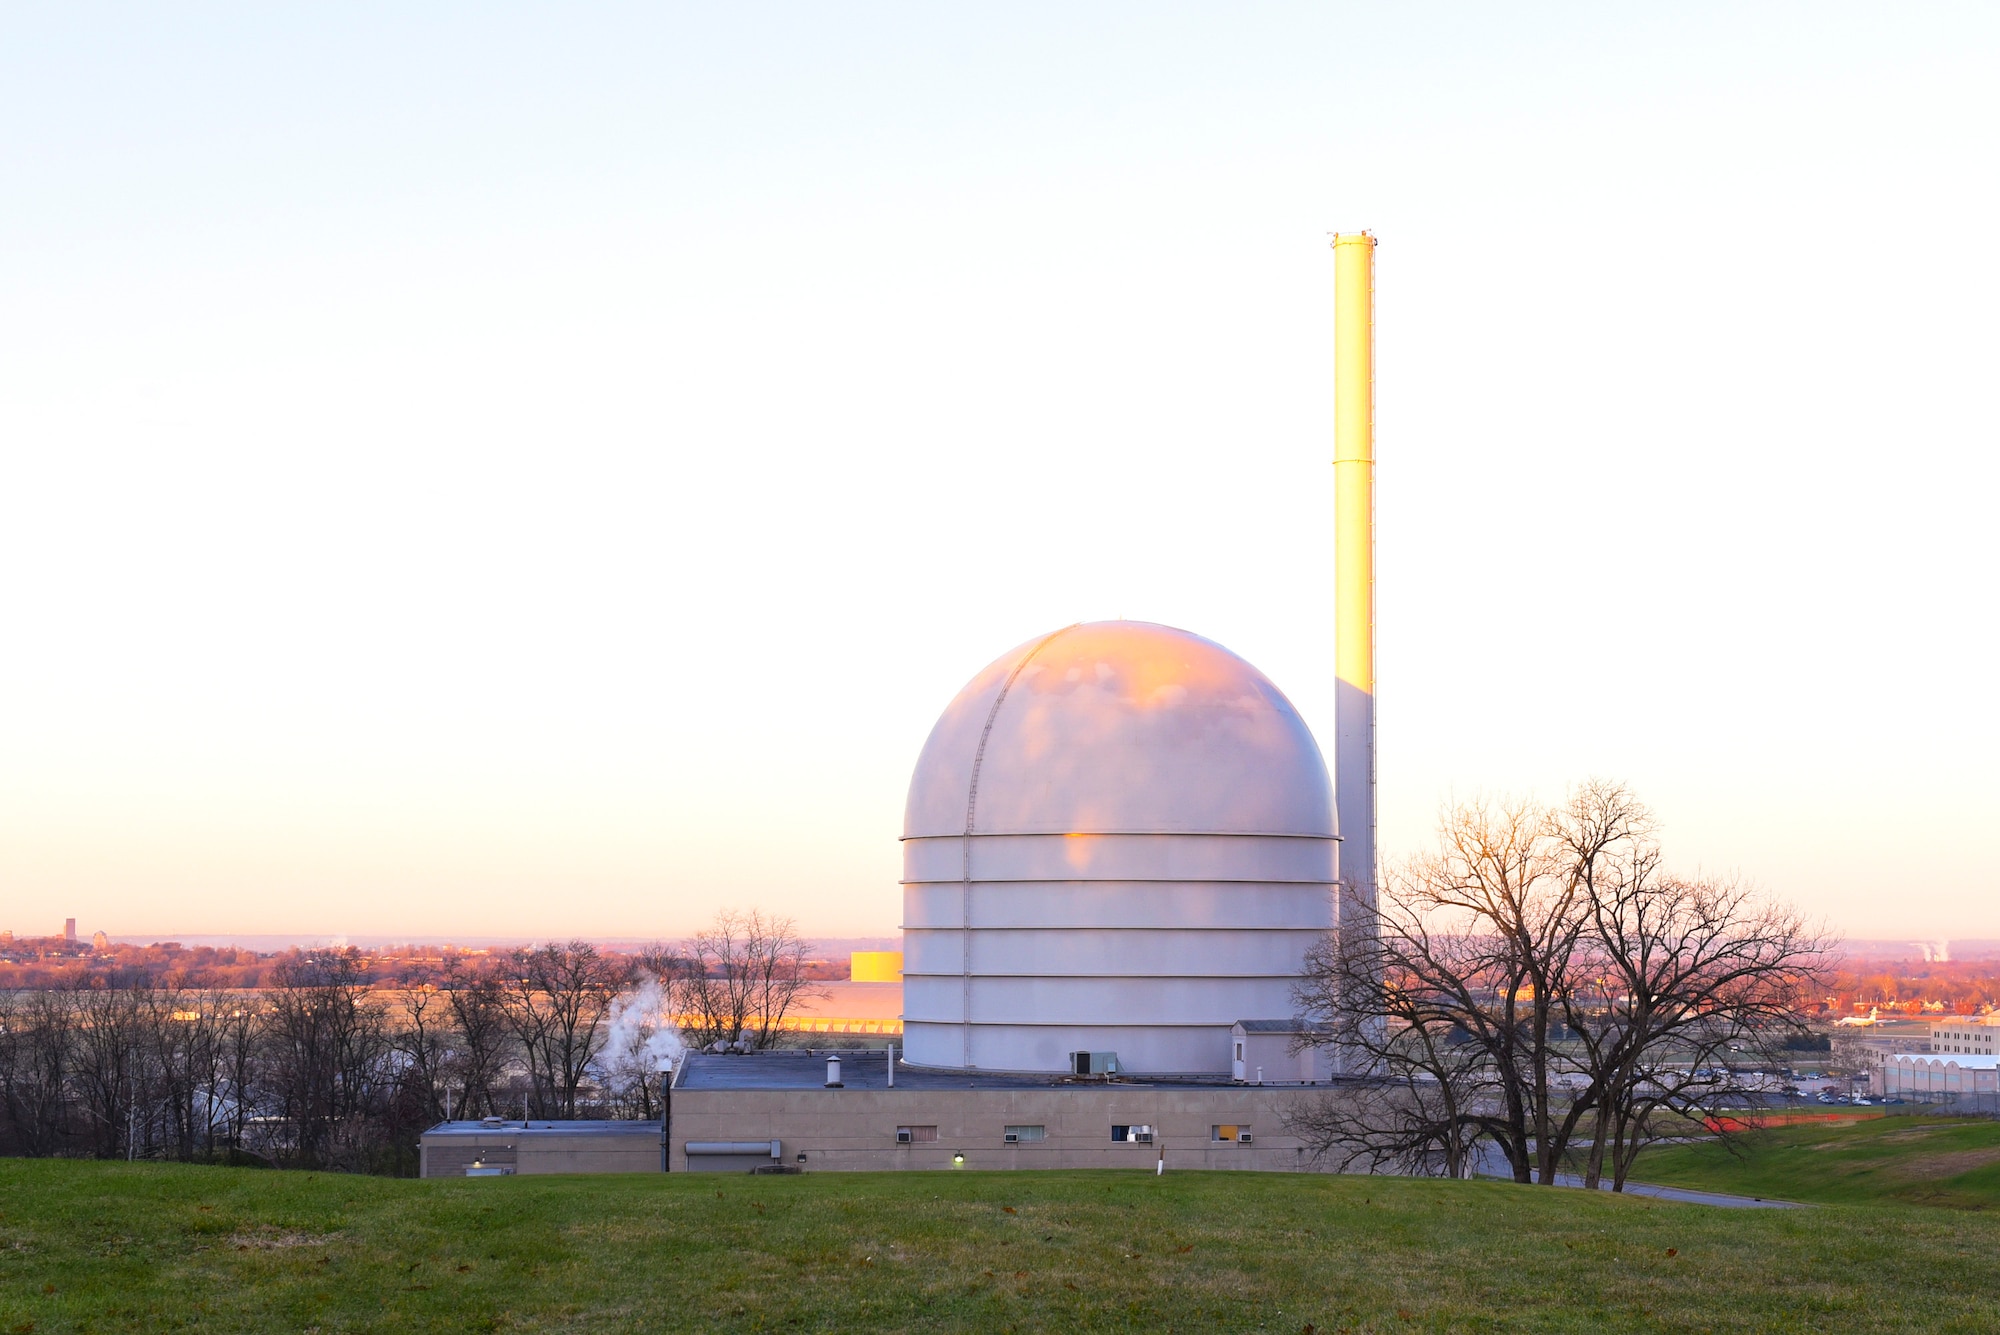 A dome covers the decommissioned nuclear reactor at Wright-Patterson Air Force Base, Ohio. Wright-Patt’s Air Force Radioactive Recycling and Disposal team regularly surveys the radiation levels surrounding the building to ensure it is safe and within regulatory limits. (U.S. Air Force photo by Jaima Fogg)